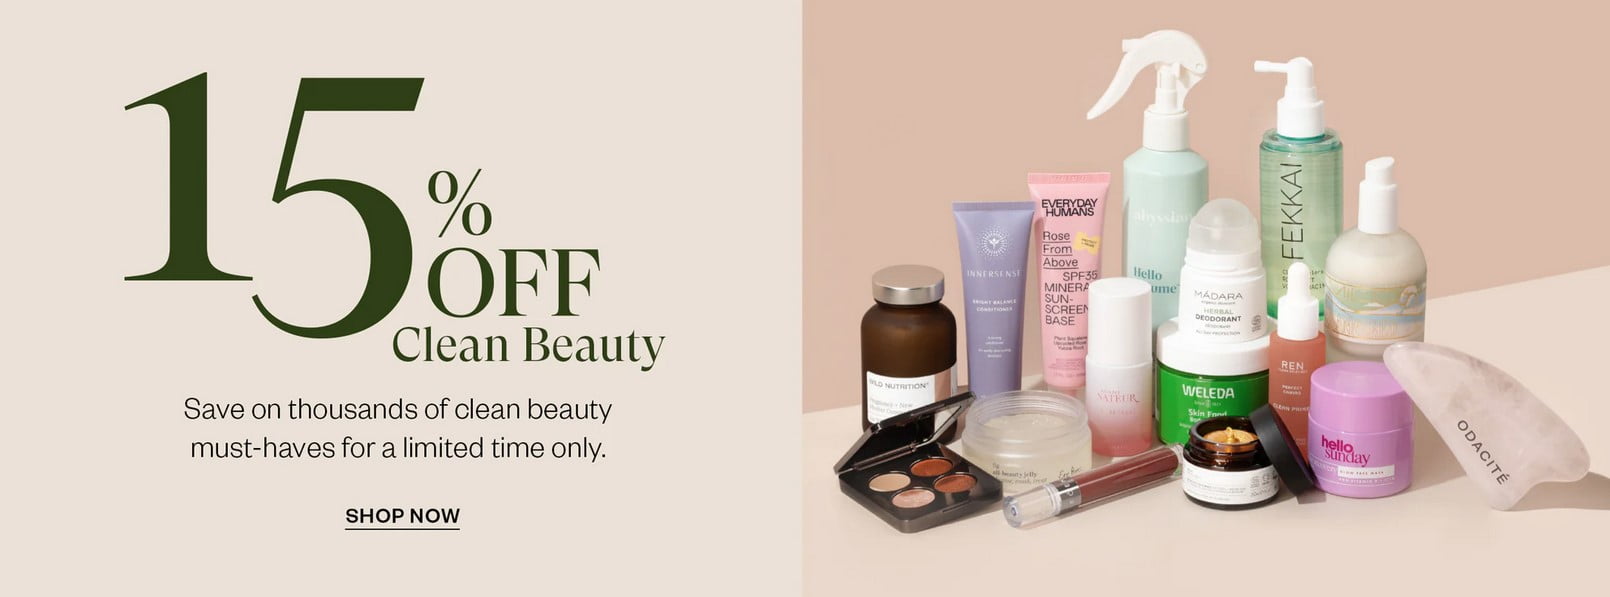 15% off Clean Beauty at Naturisimo